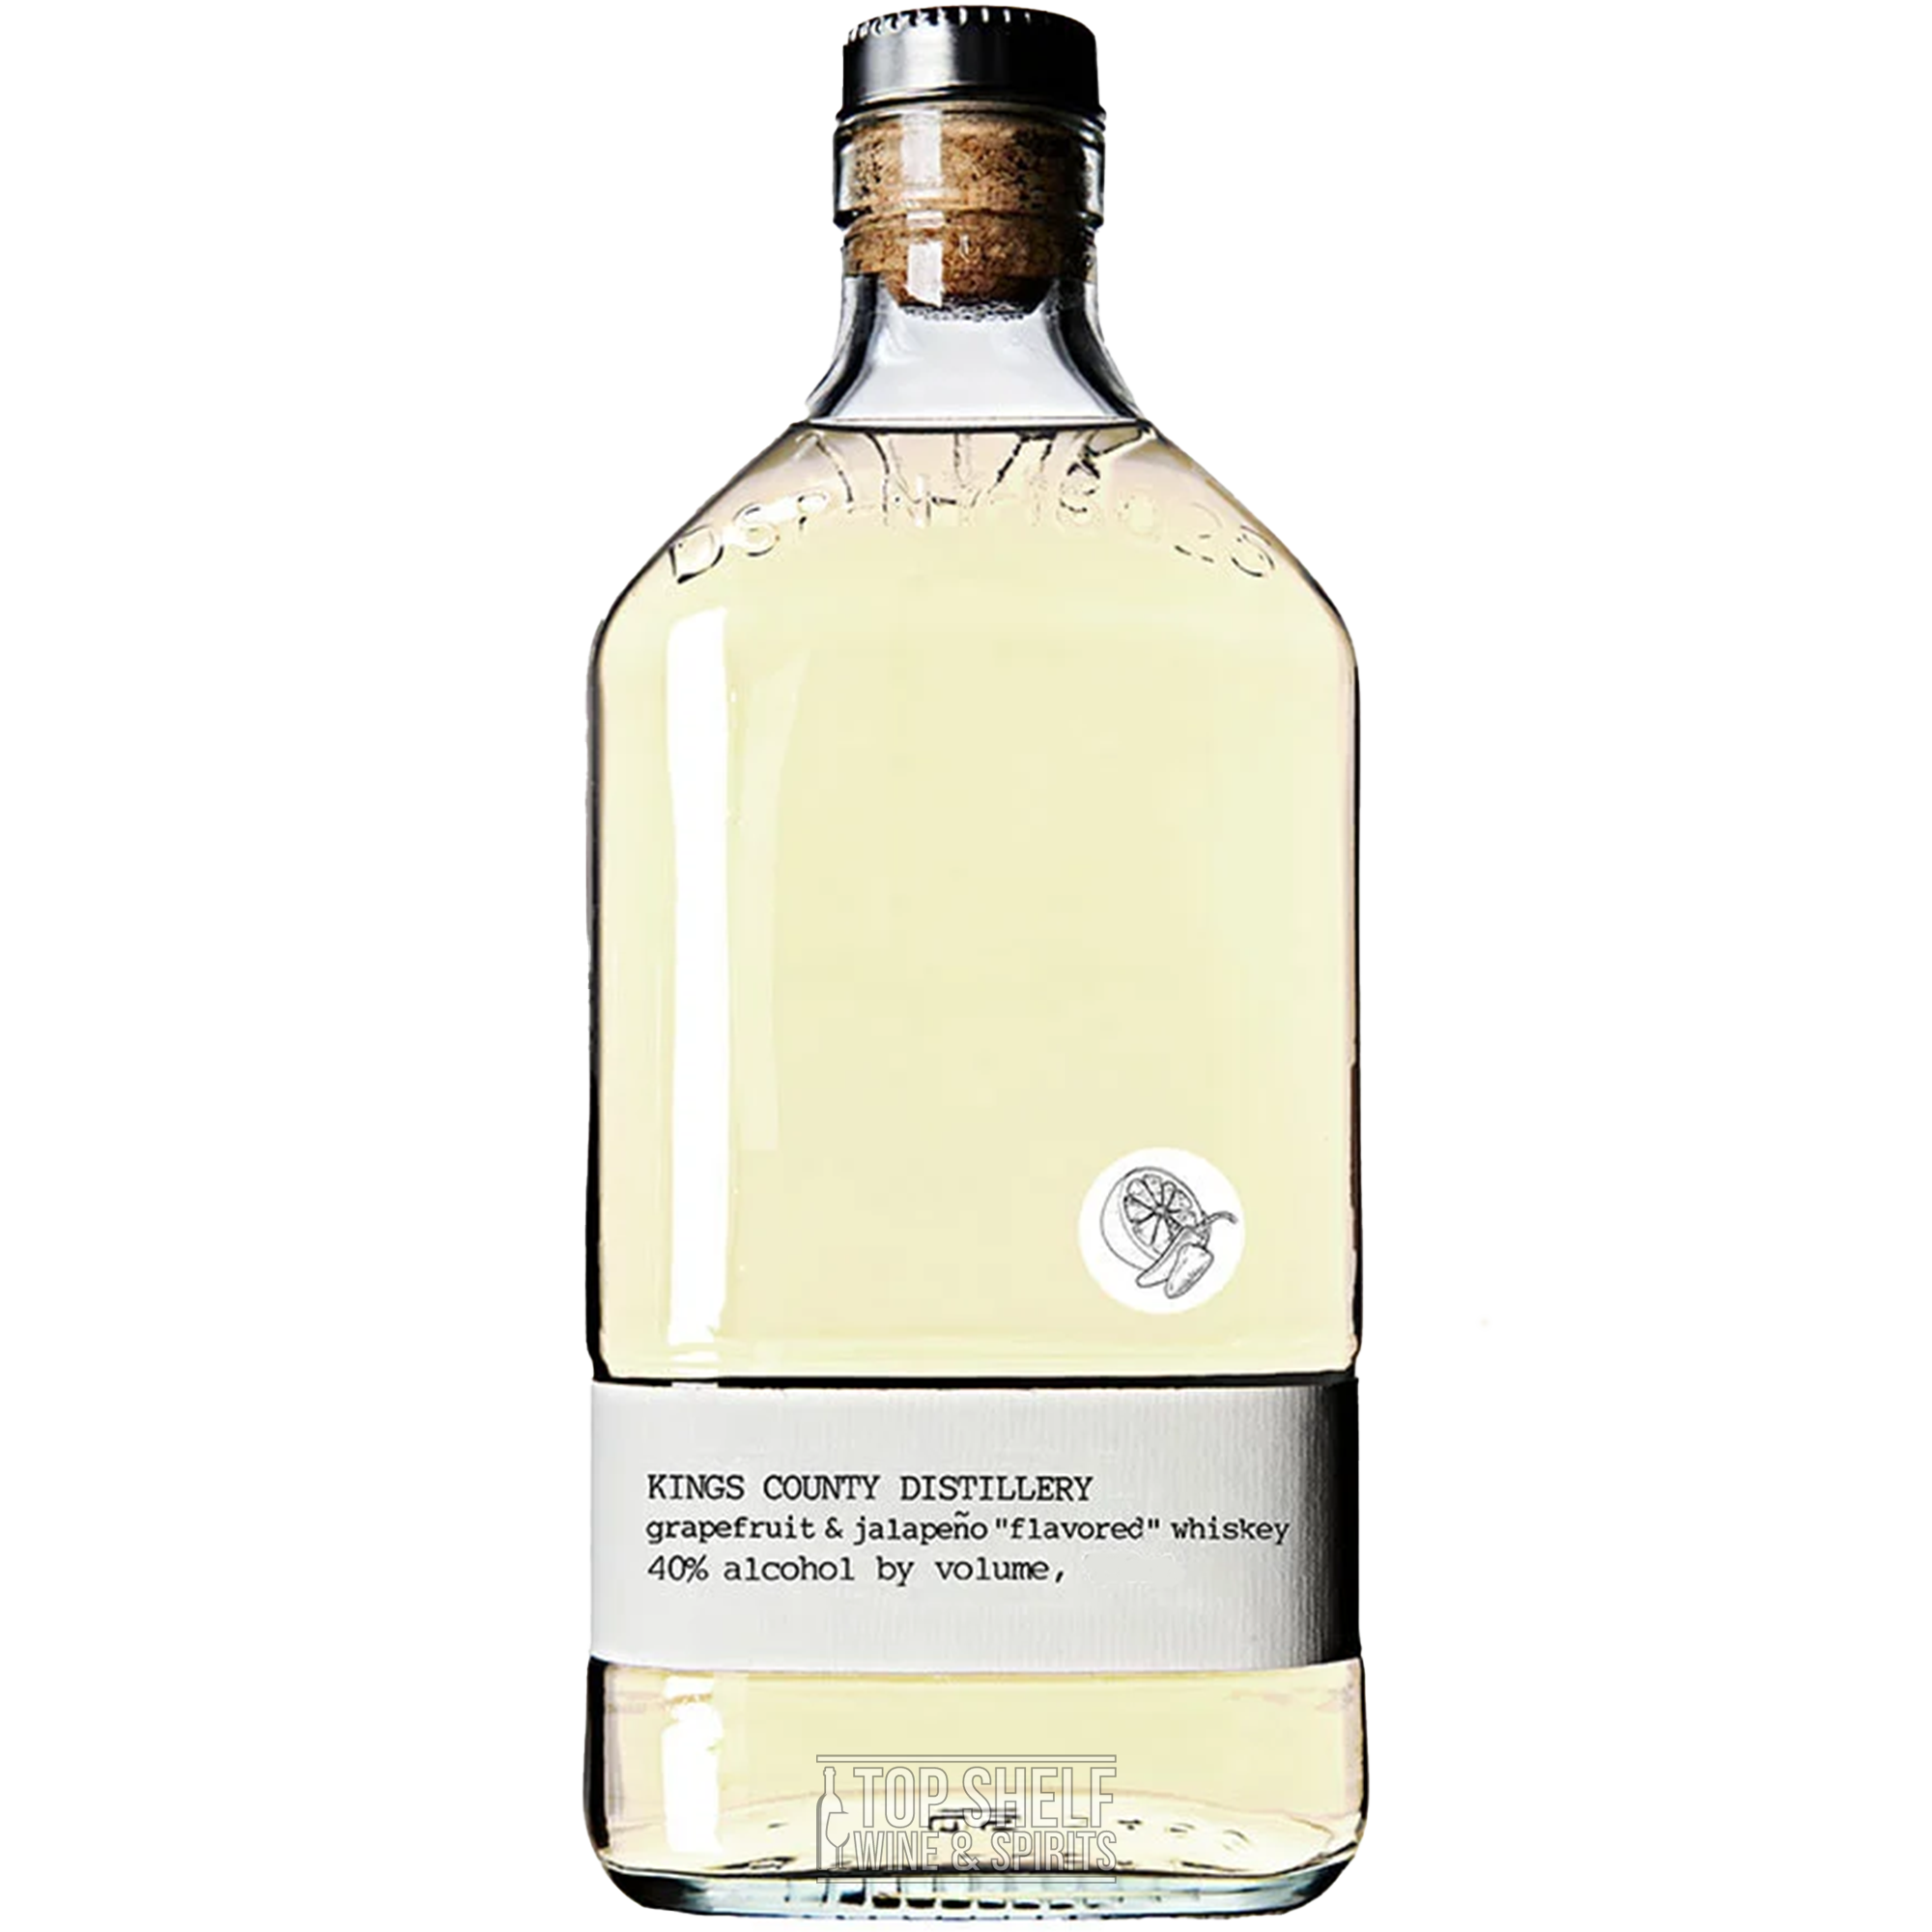 King's County Grapefruit Jalapeno "Flavored" Whiskey 200ml